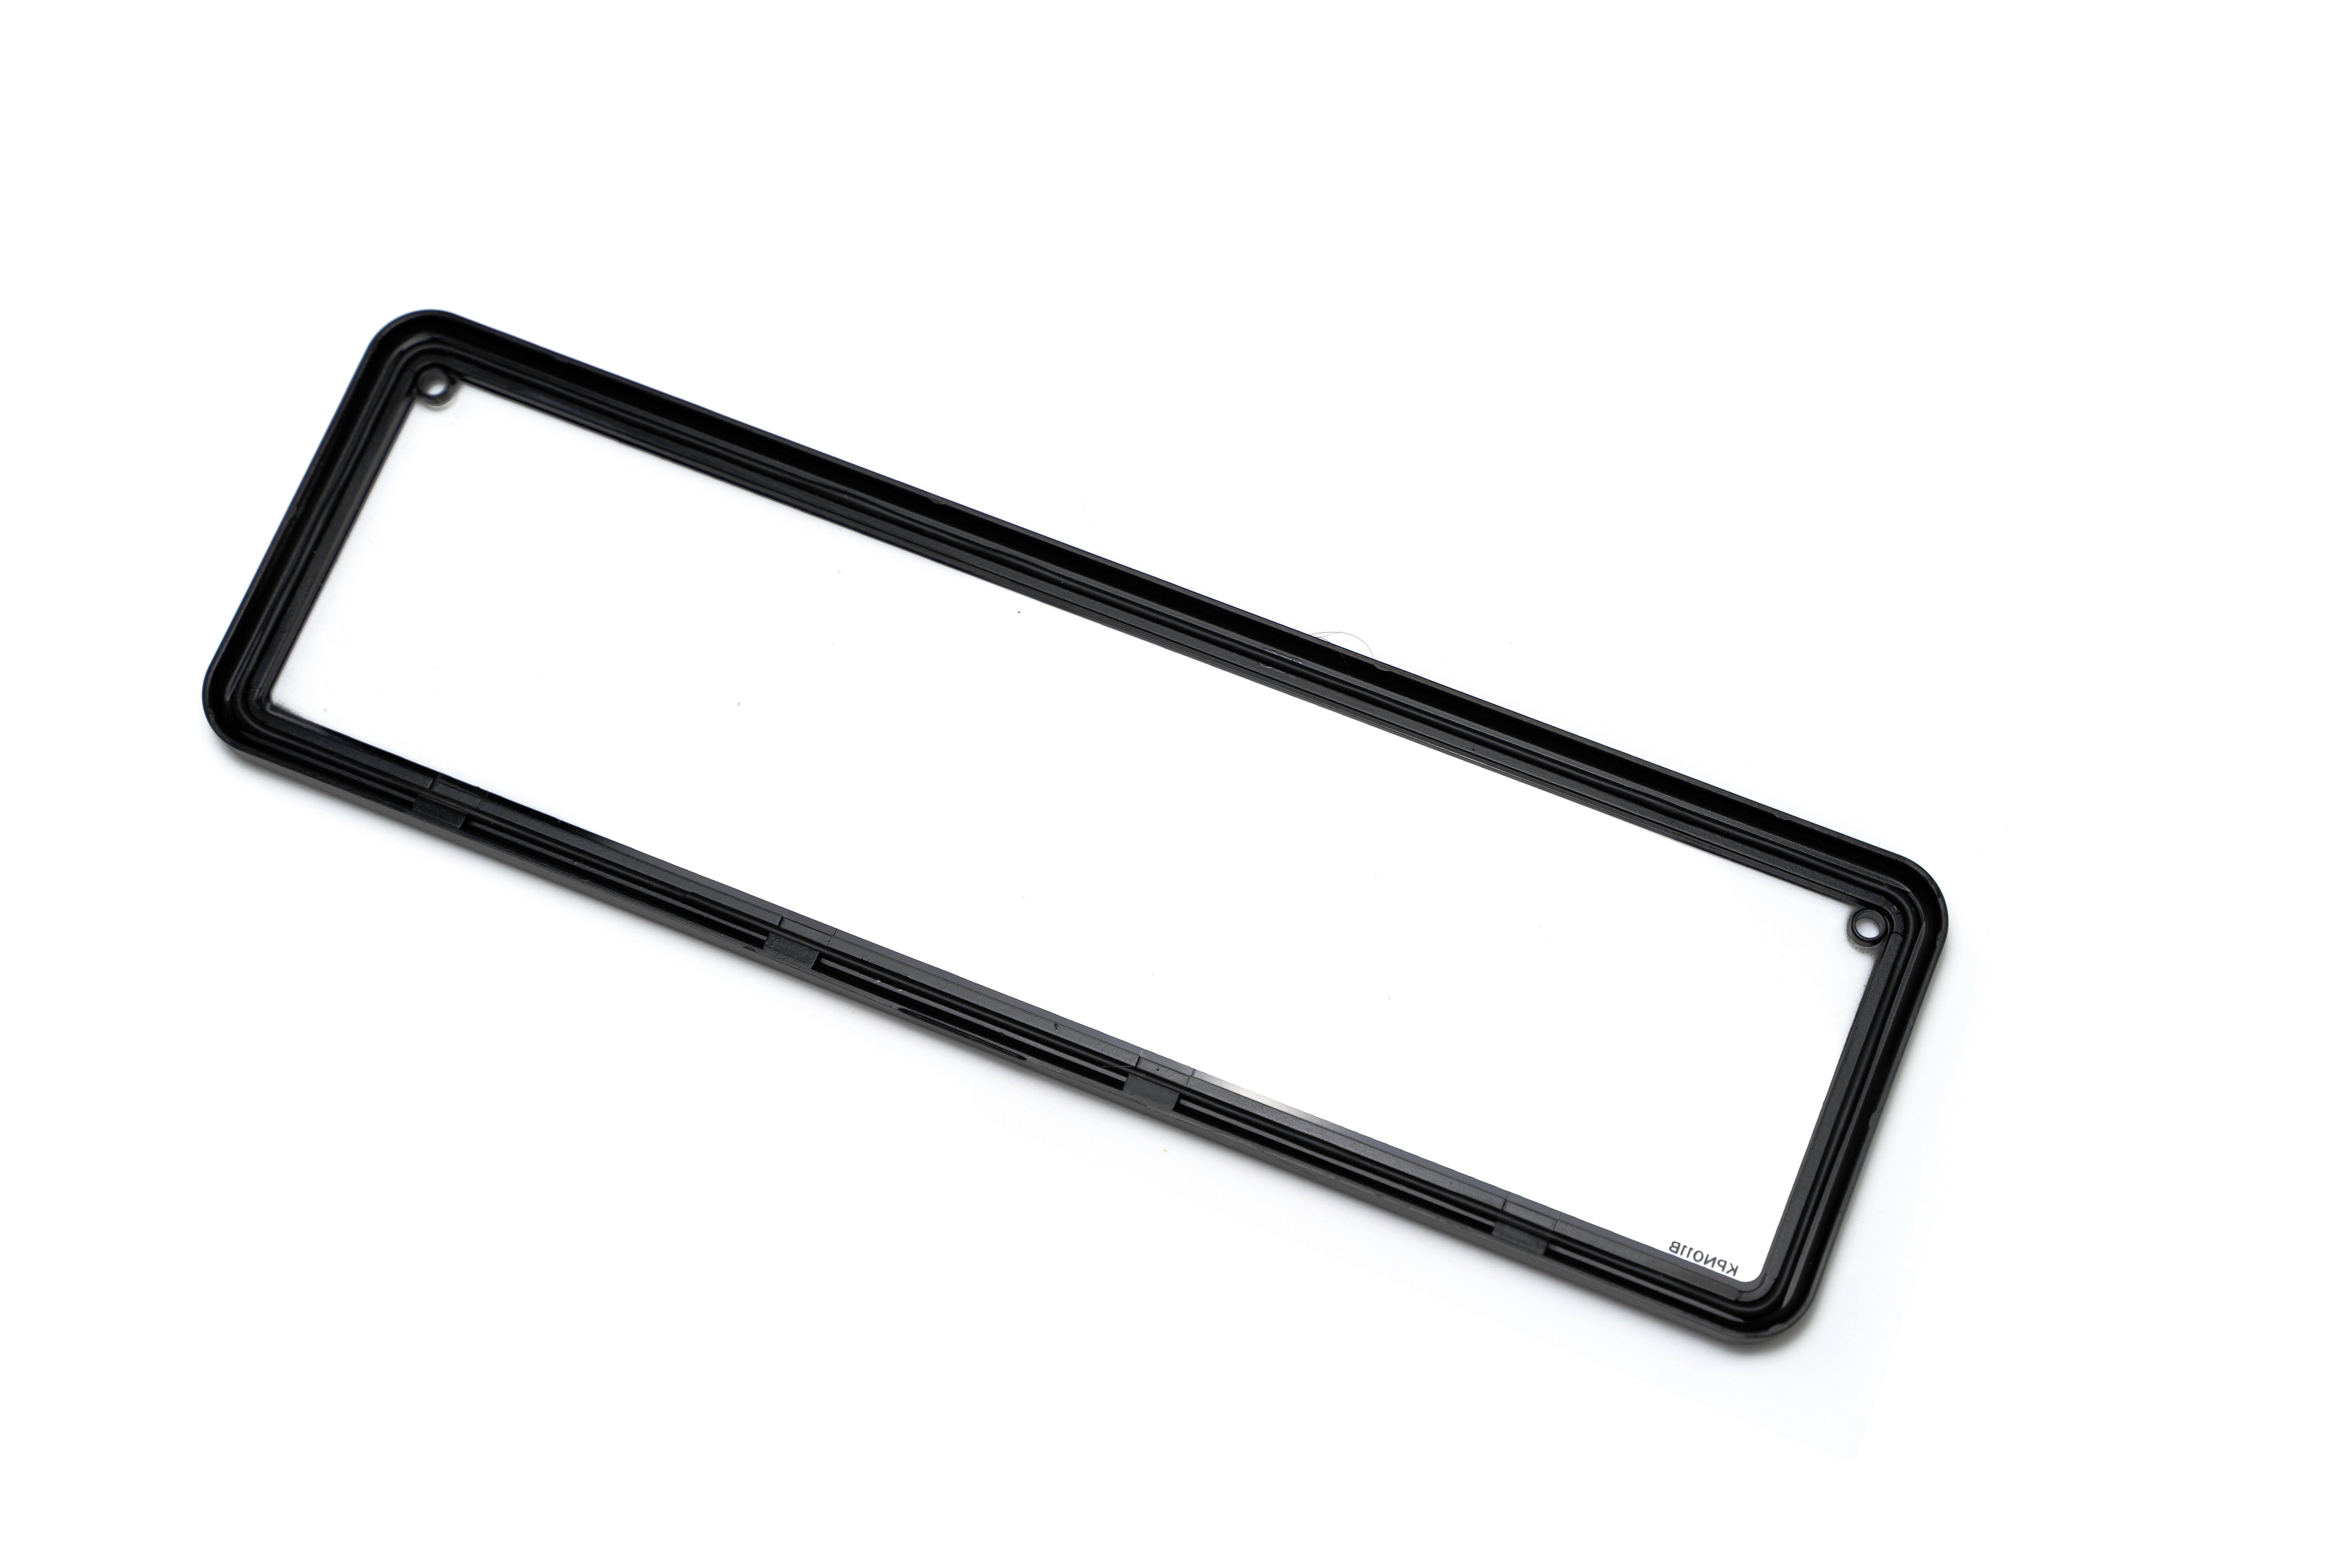 KINGPIN NSW/SA Slimline Rear Number Plate Cover 372mm (w) x 107mm (h)